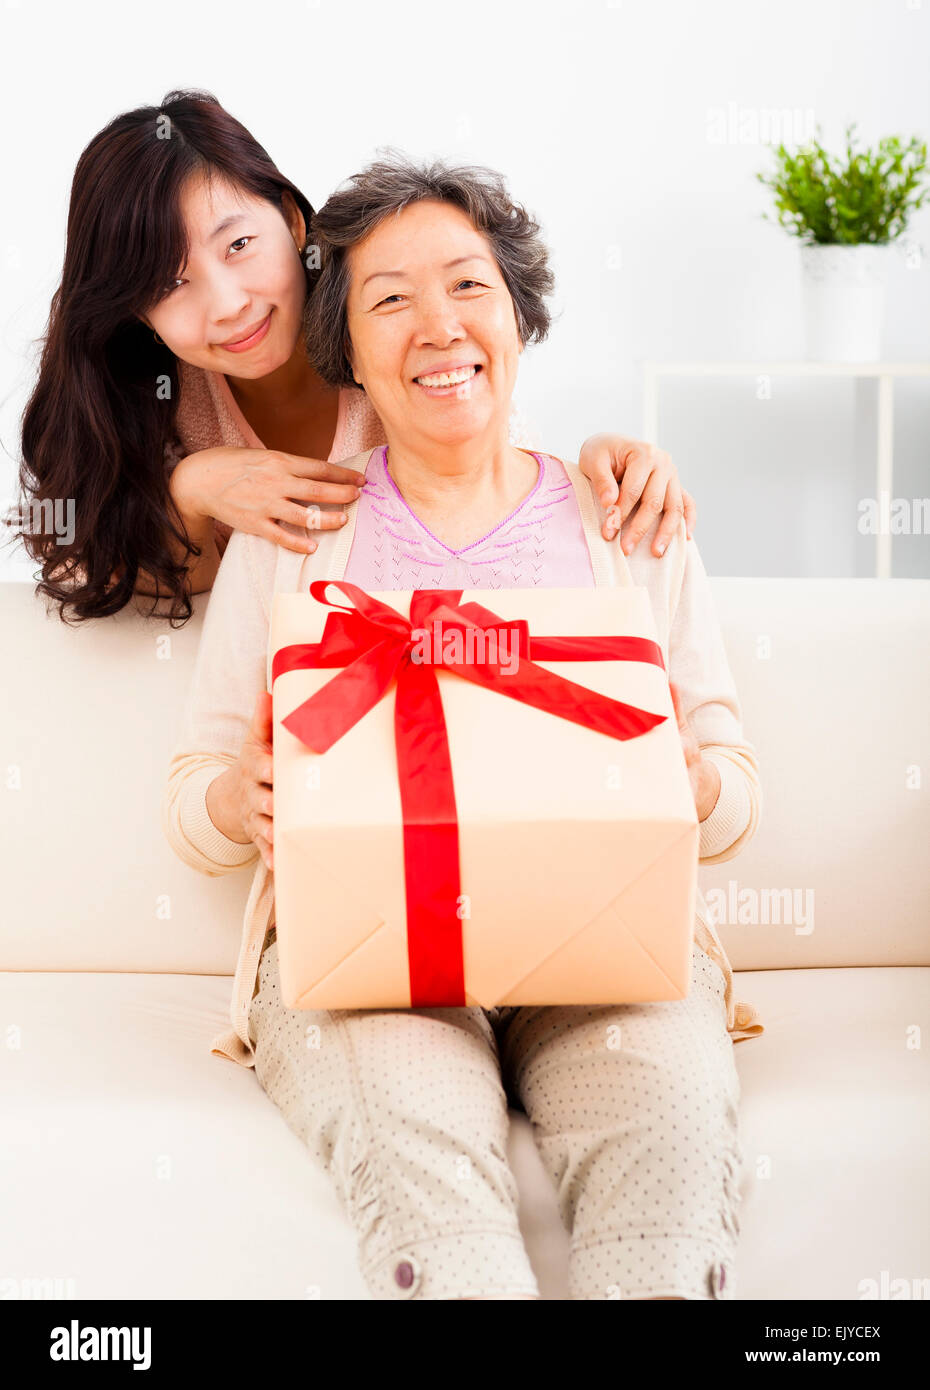 happy mother and daughter with gift box Stock Photo